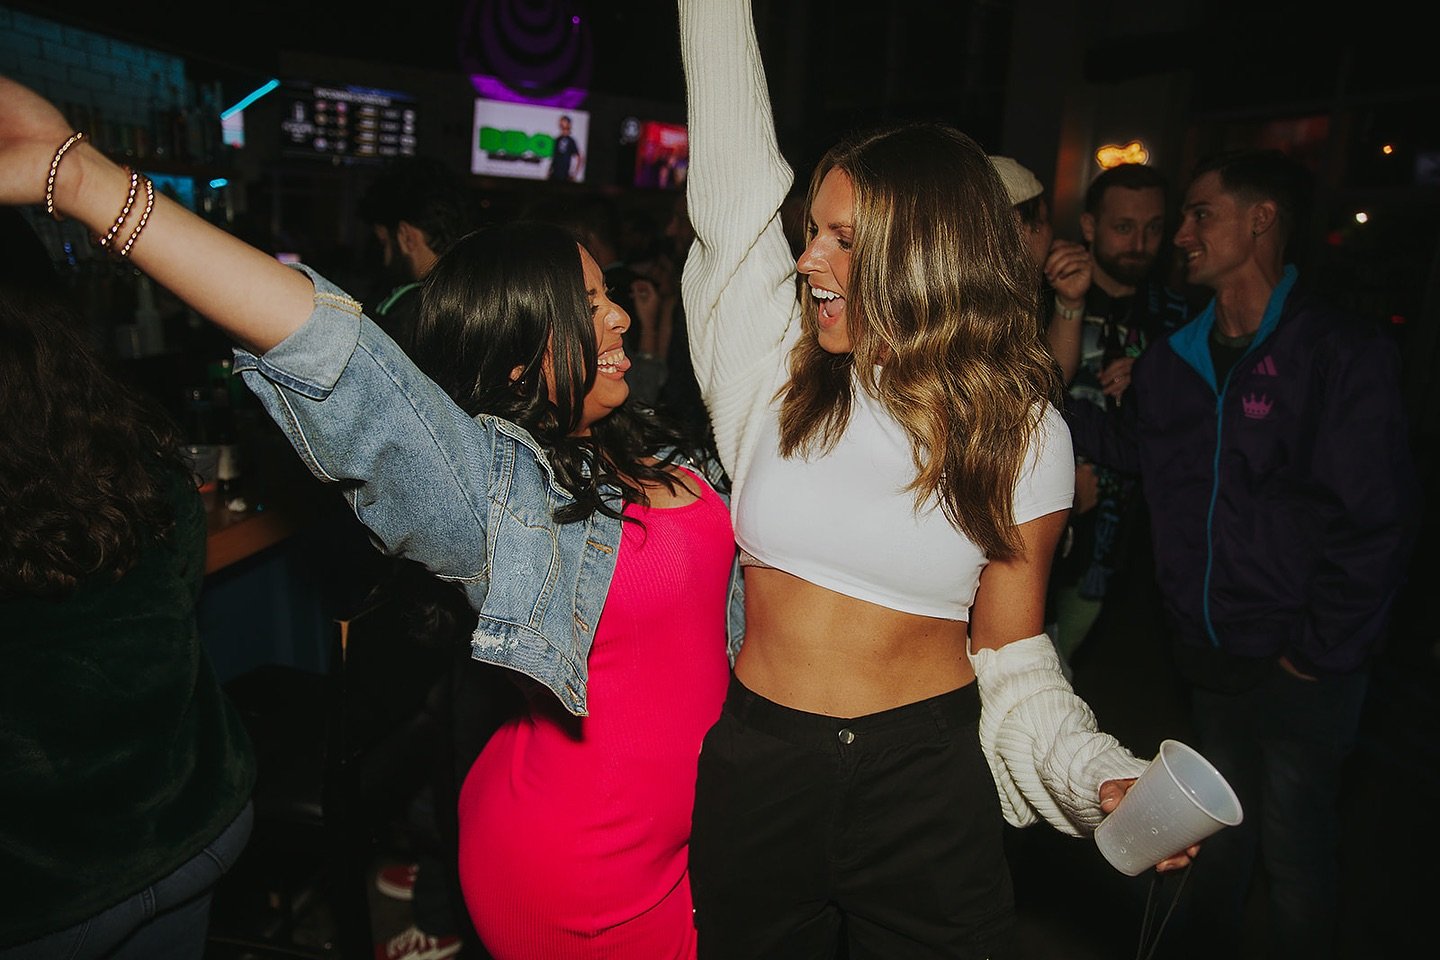 Lovin&rsquo; Life weekend is finally here and we are ready to let loose! 🤪 Slide on over to Southend tonight for a POST (get it 😉) festival party! 🍻🎶

🩵 $5 Wells
🩵 $5 IPAs
🩵 $10 Lovin&rsquo; Lemonade
🩵 $9 Jack &amp; Coke
🩵 $10 El Jimador Mul